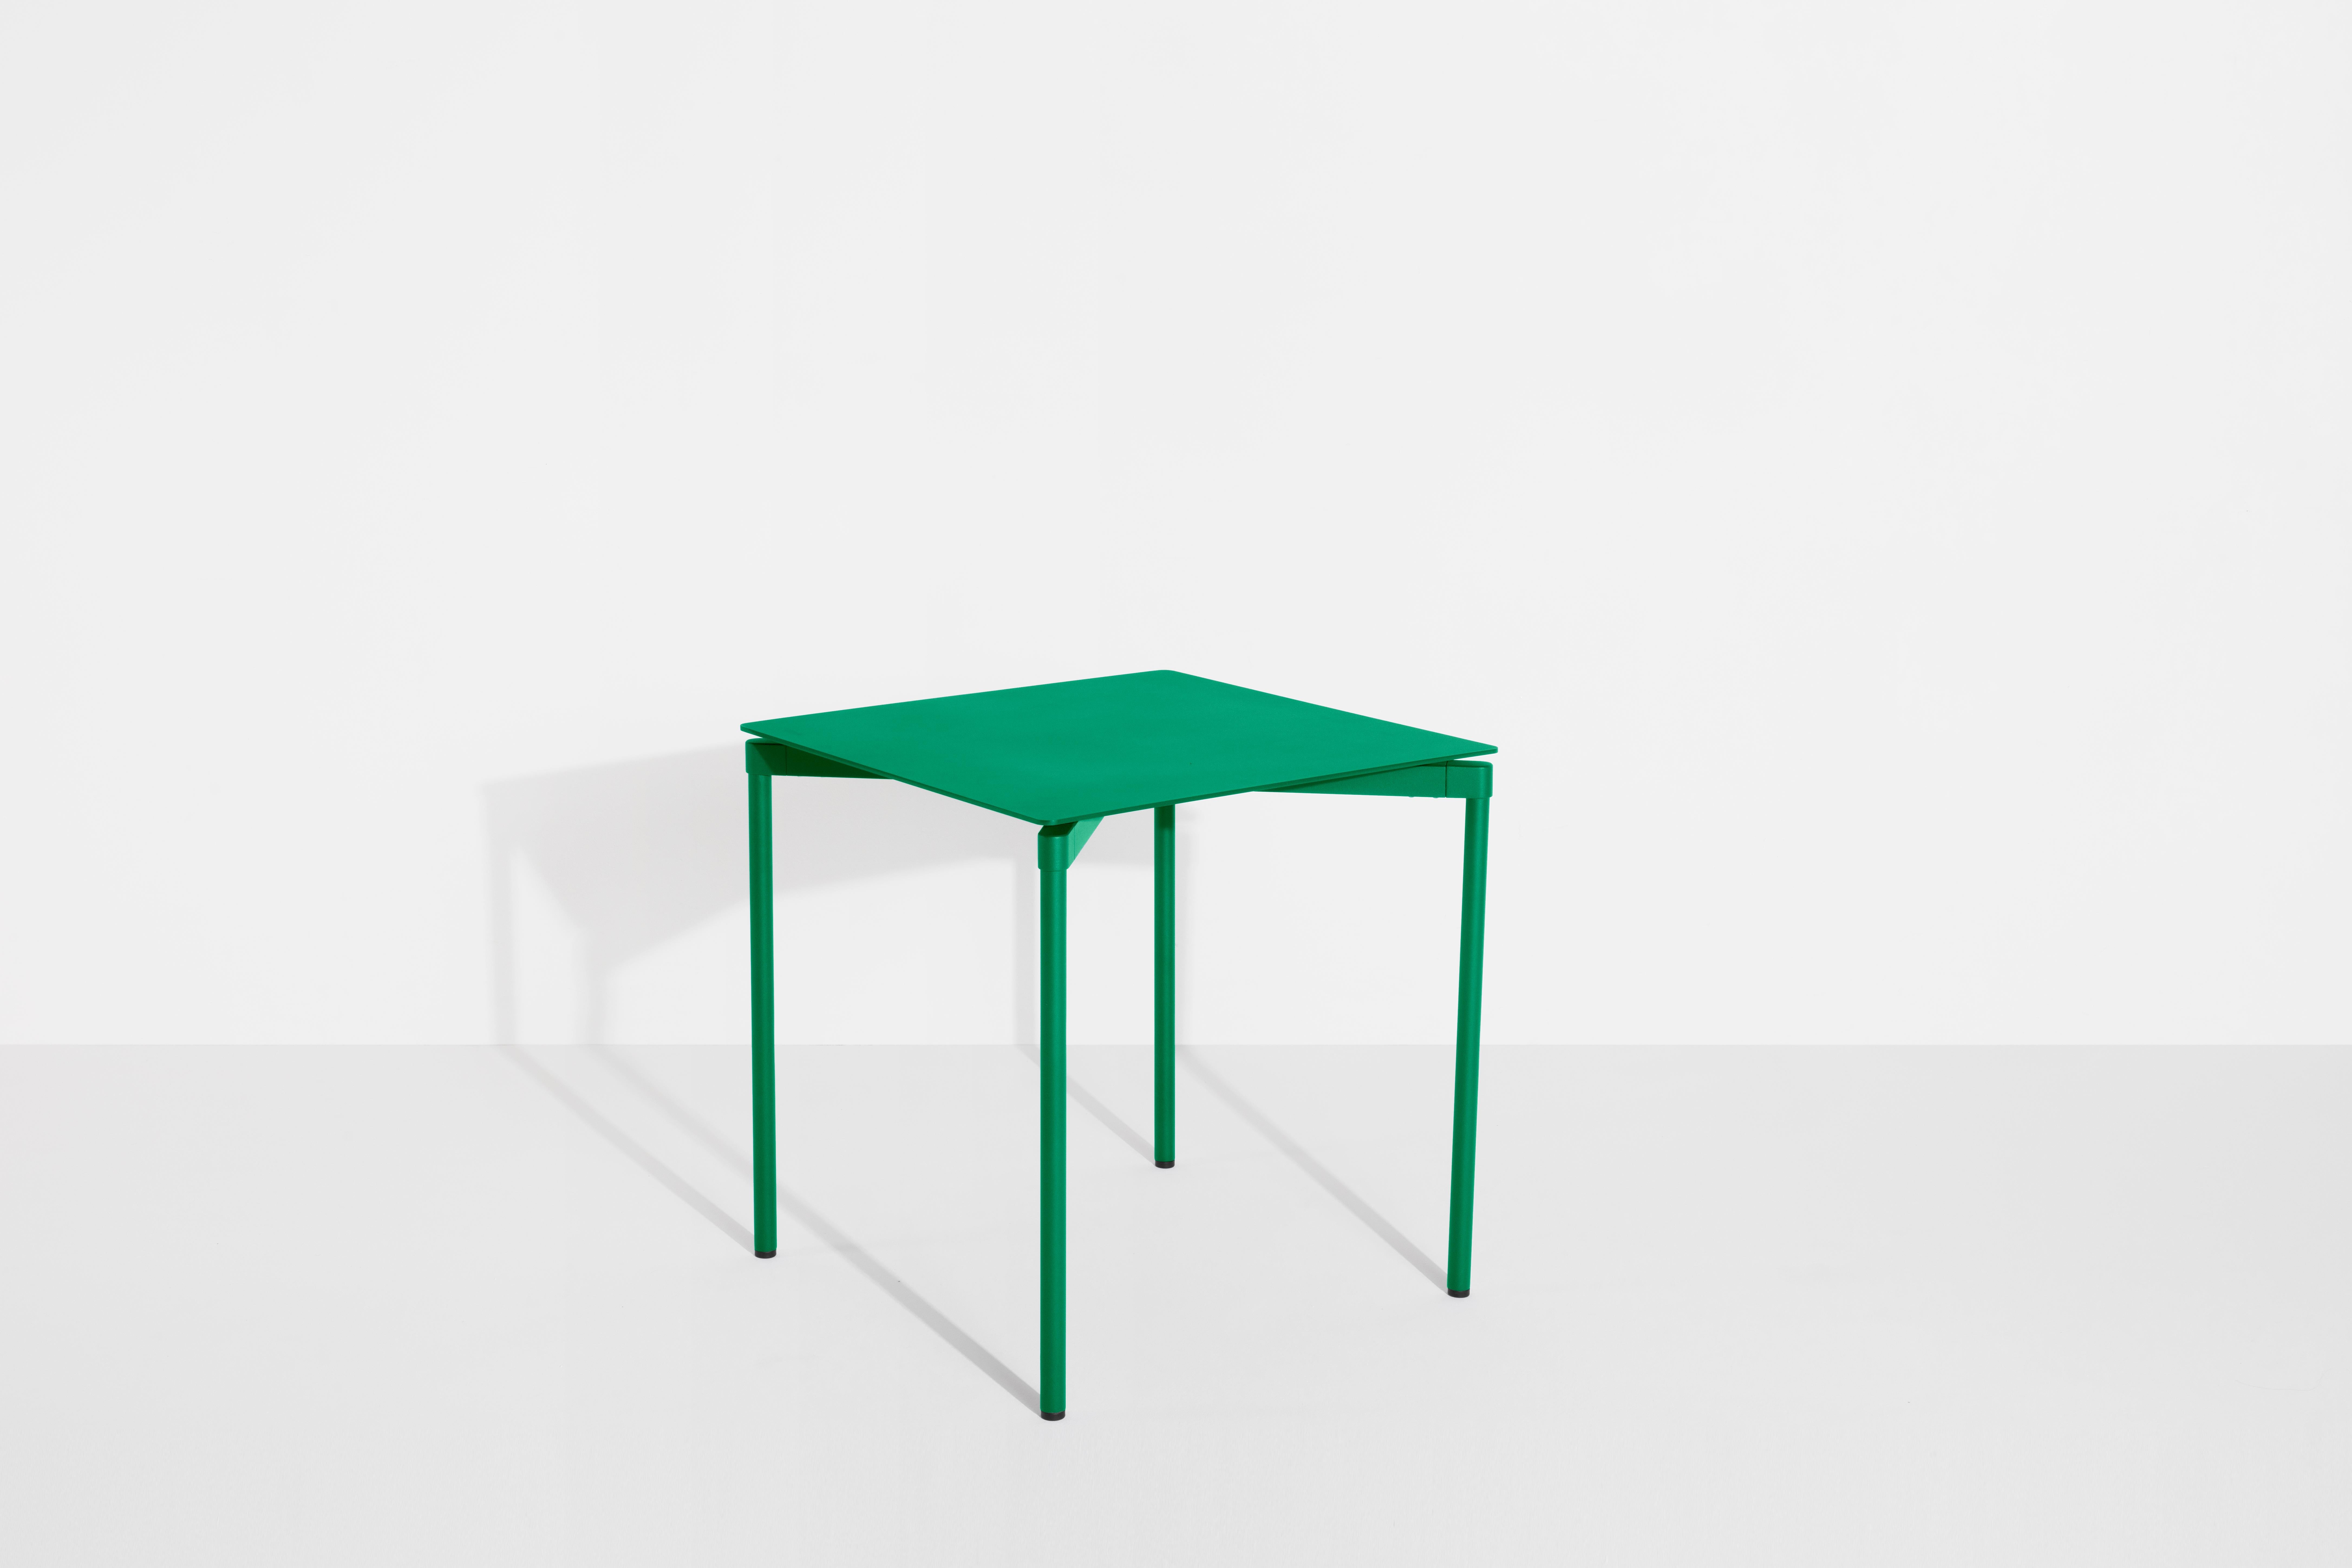 Contemporary Petite Friture Fromme Square Table in Mint-Green Aluminium by Tom Chung For Sale